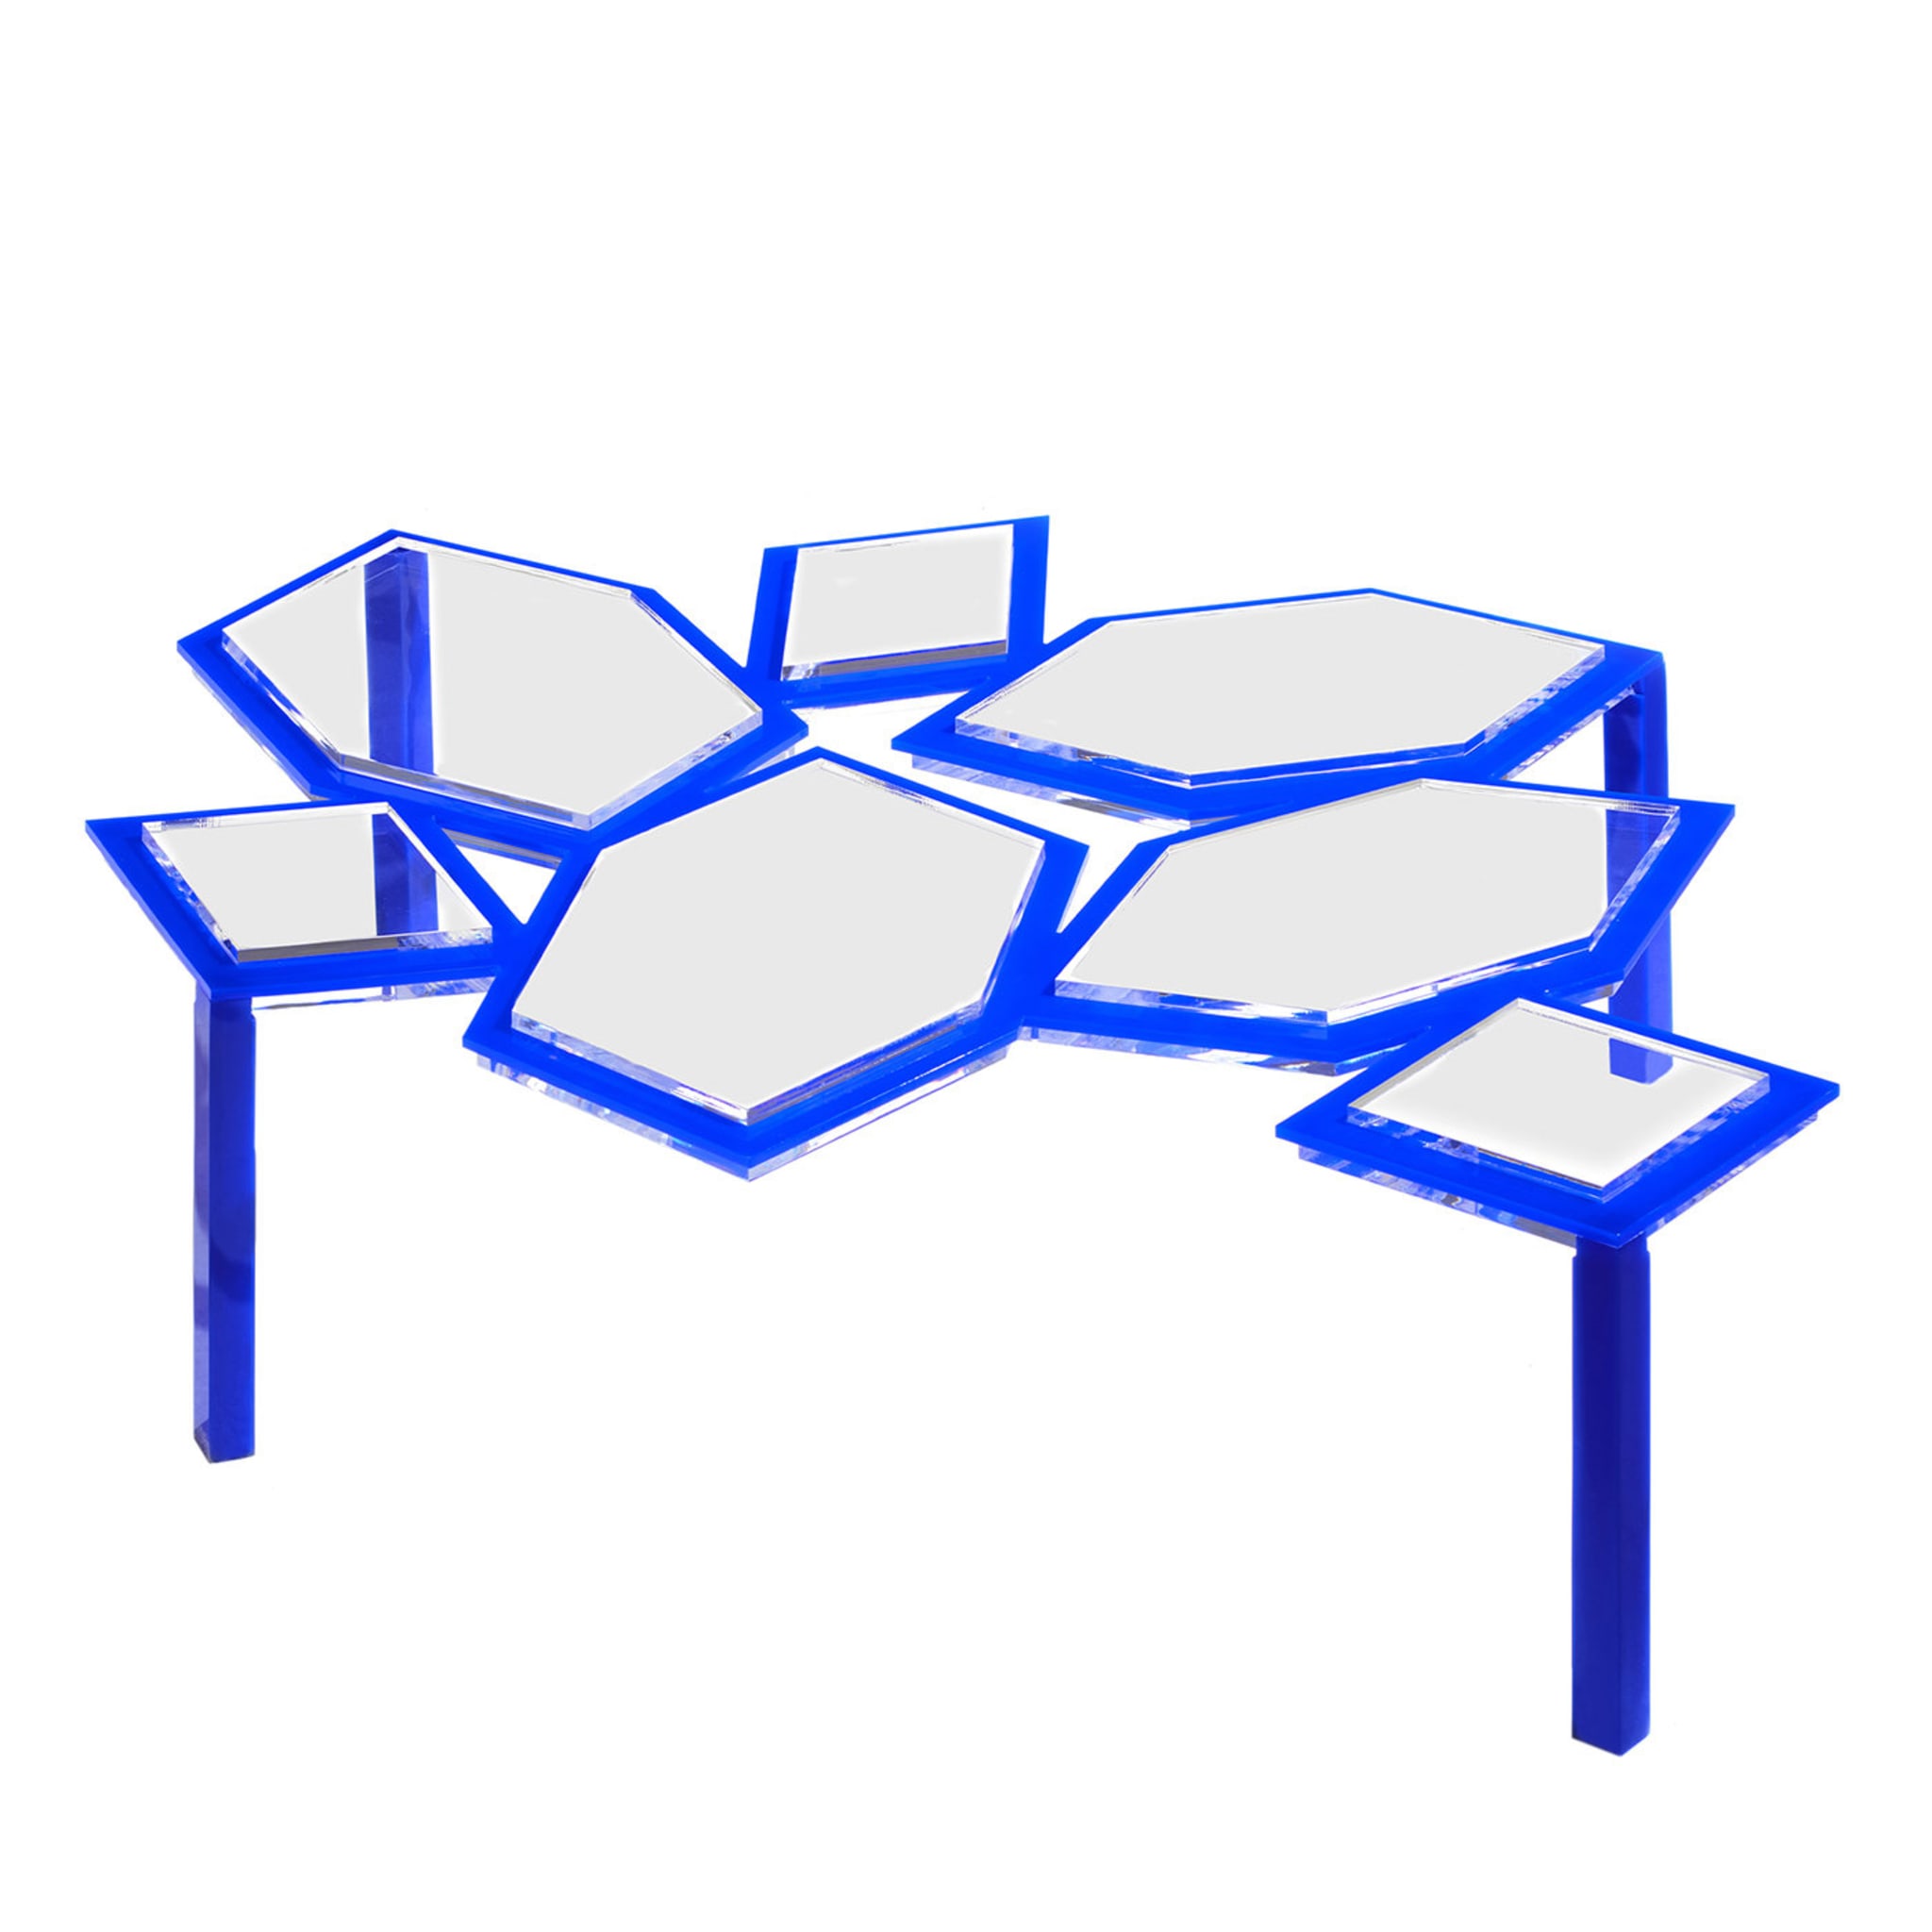 Penrose Small Blue Coffee Table #2 - Main view